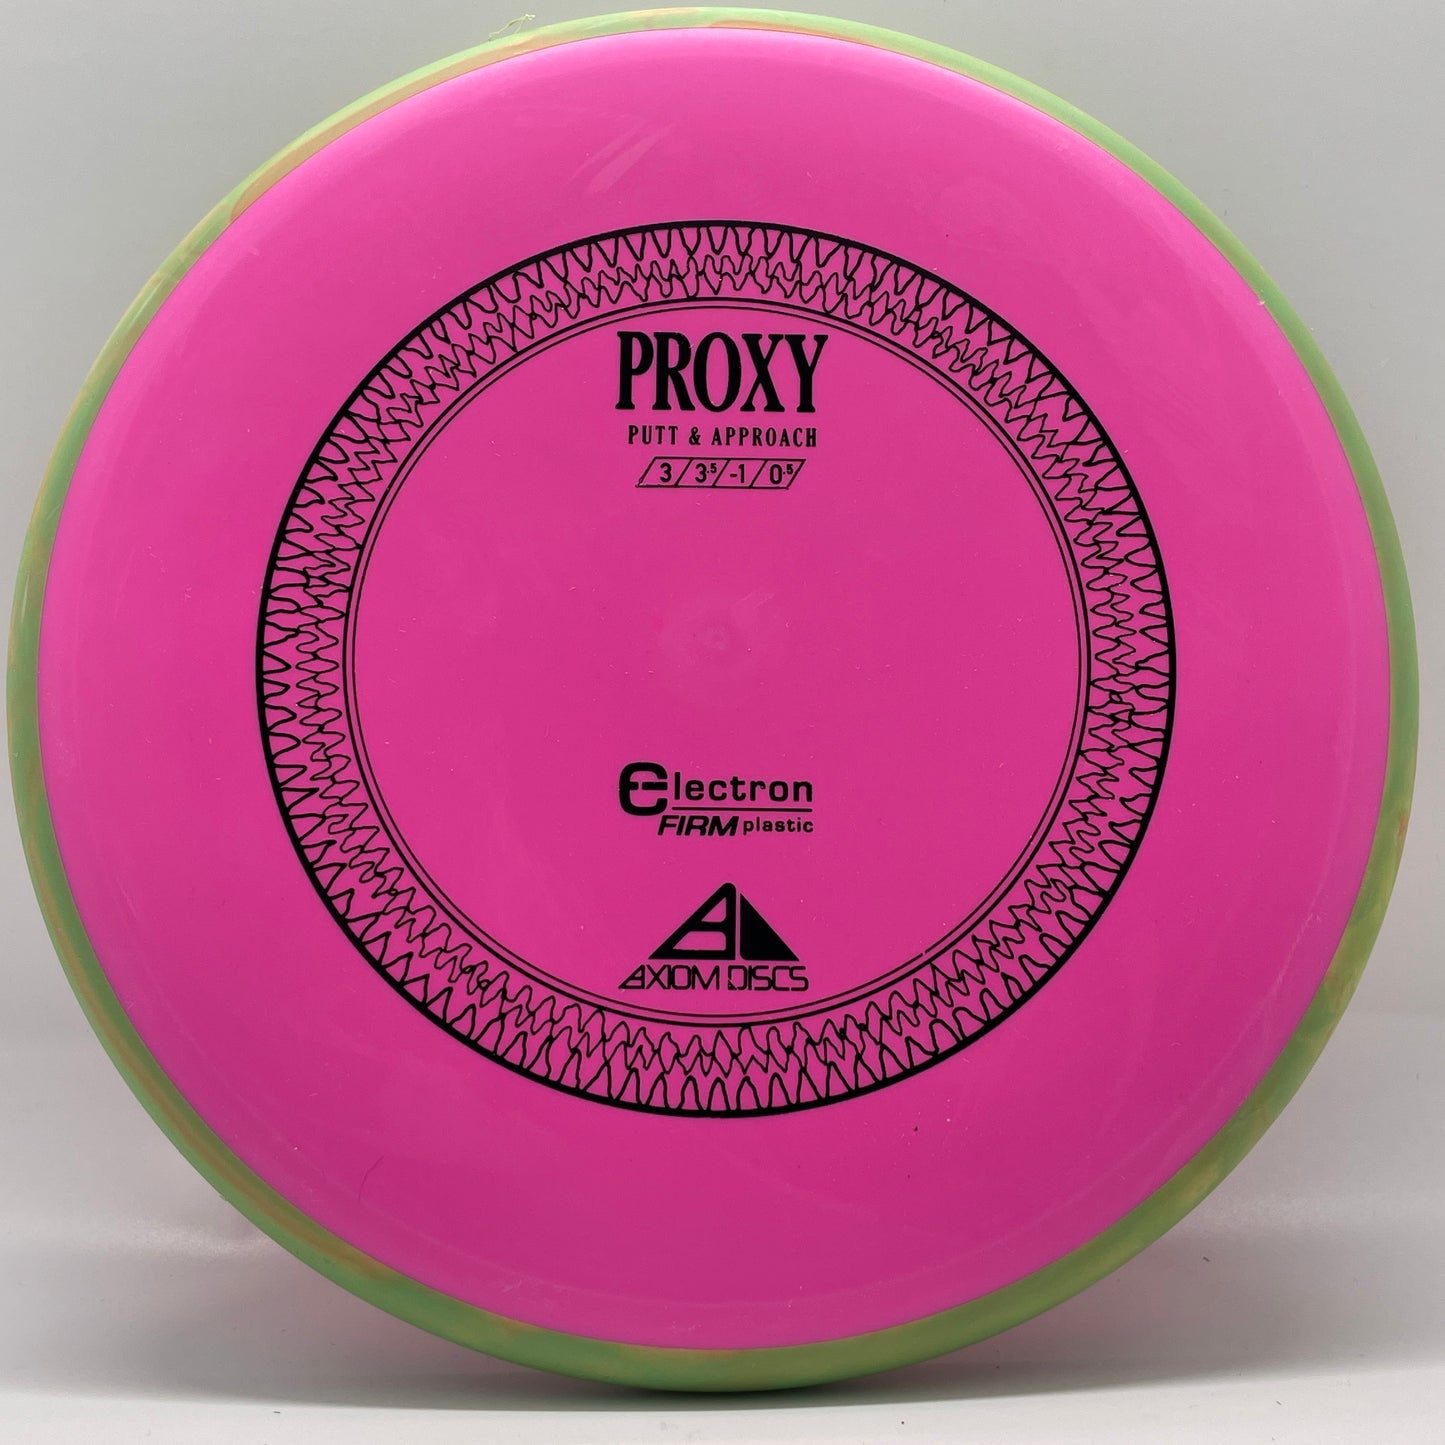 Axiom Proxy Electron Firm - Putter